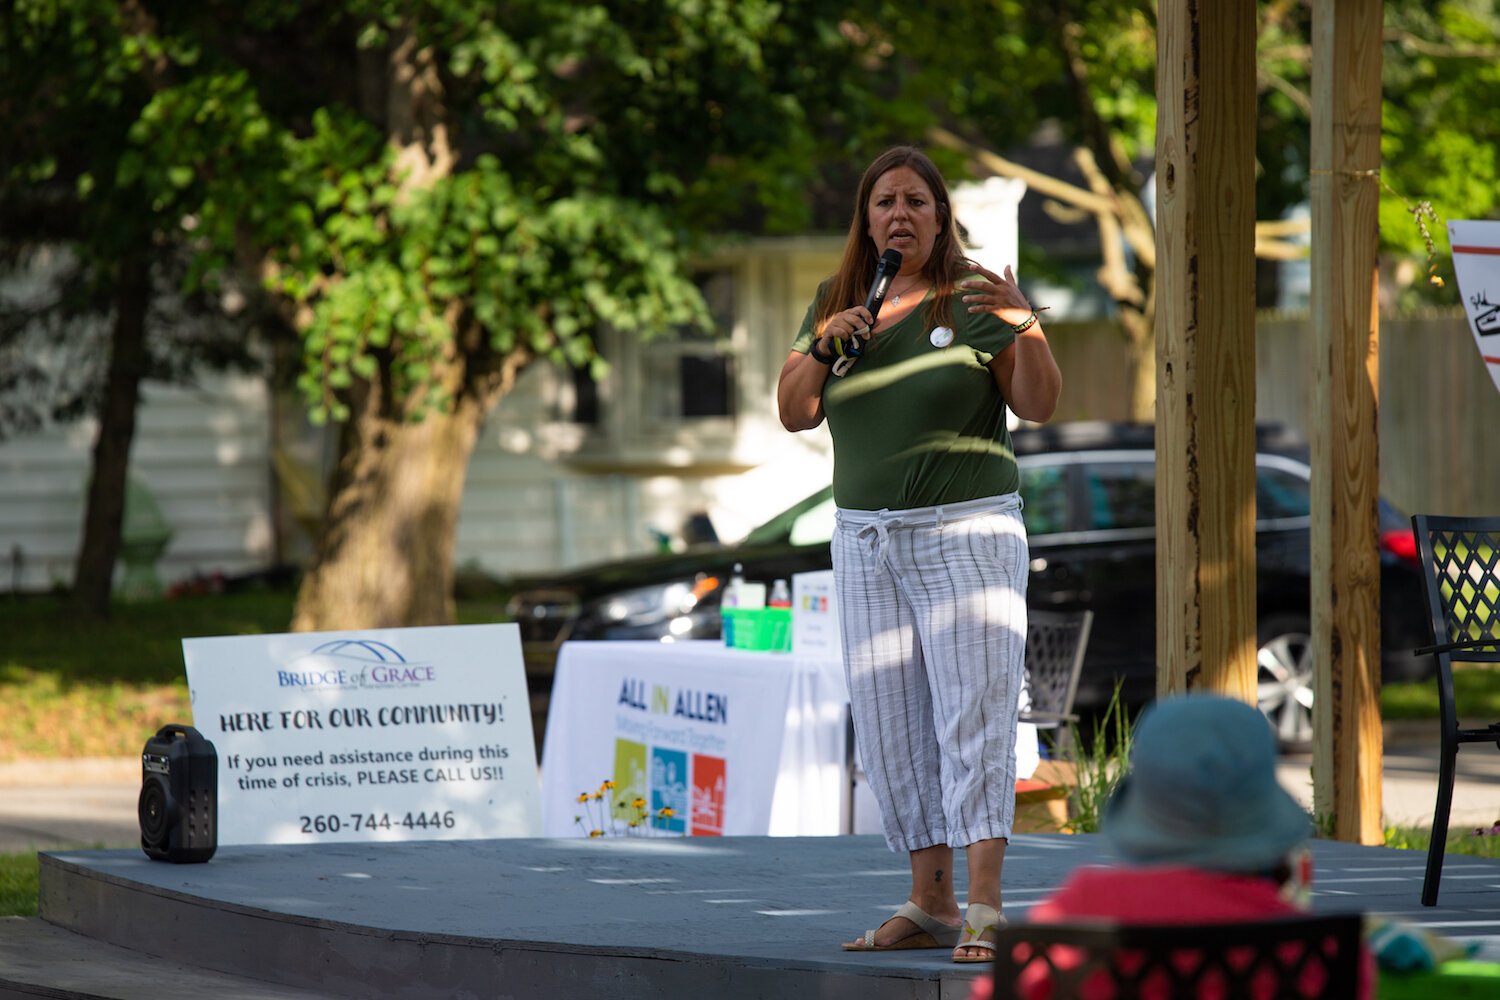 County Council, at-large, hopeful Melissa Fisher shared a story at the first OTG Southeast event.